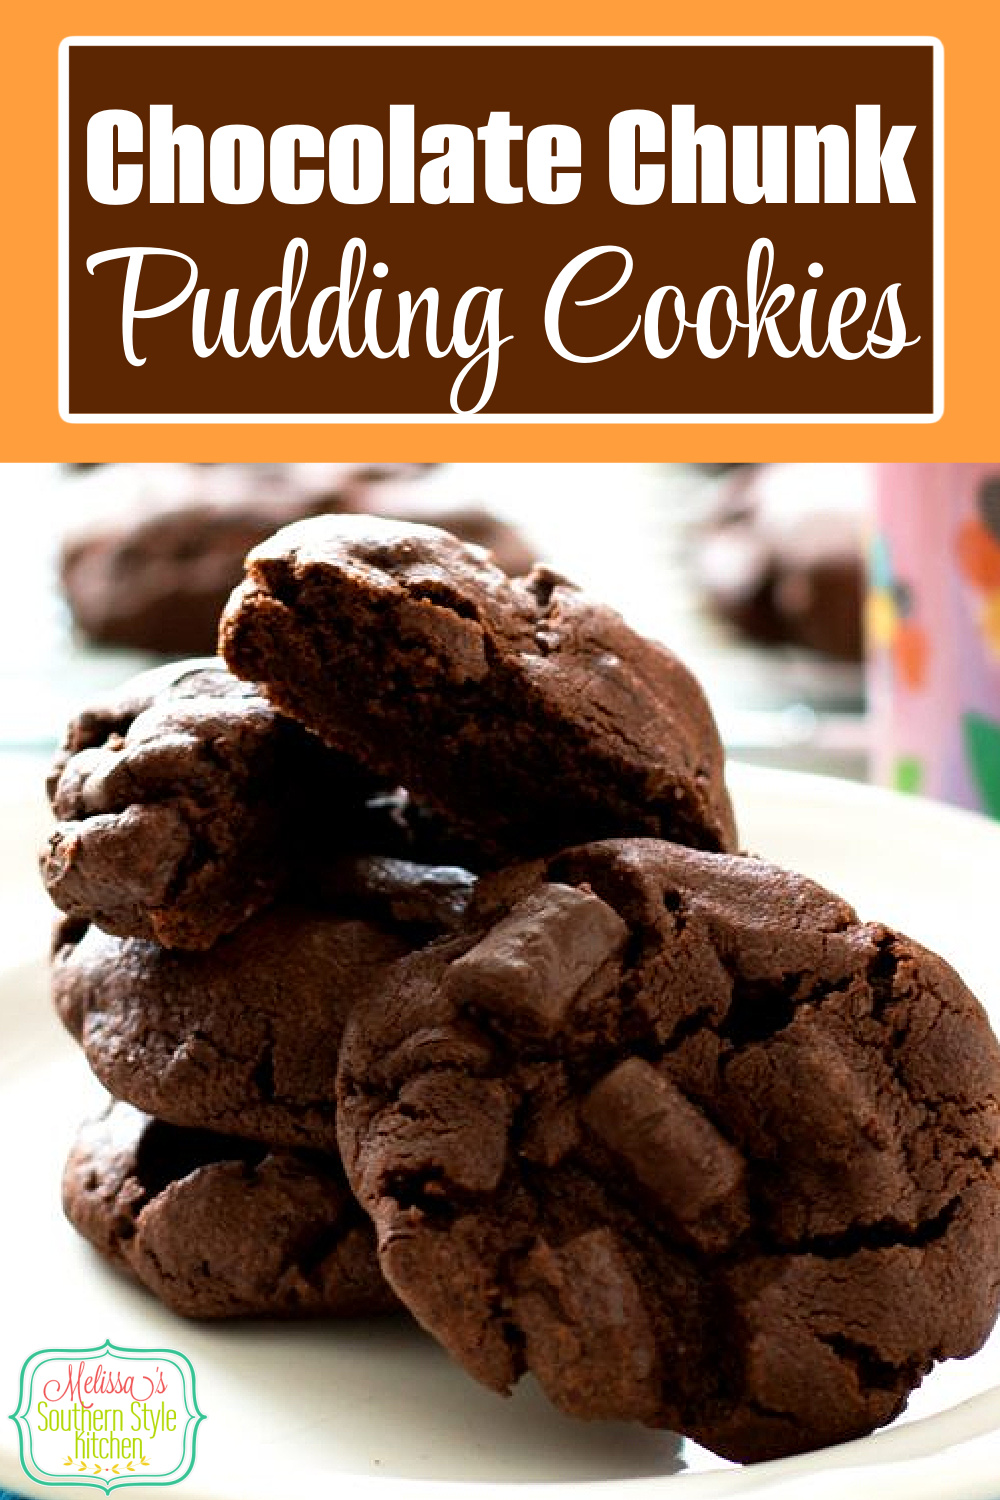 Get your chocolate fix with these double Chocolate Chunk Pudding Cookies! #chocolatecookies #chocolatechunkcookies #cookierecipes #chocolatechipcookies #holidays #holidaybaking #desserts #dessertfoodrecipes #southernfood #puddingcookies #christmascookies #holidaydesserts via @melissasssk